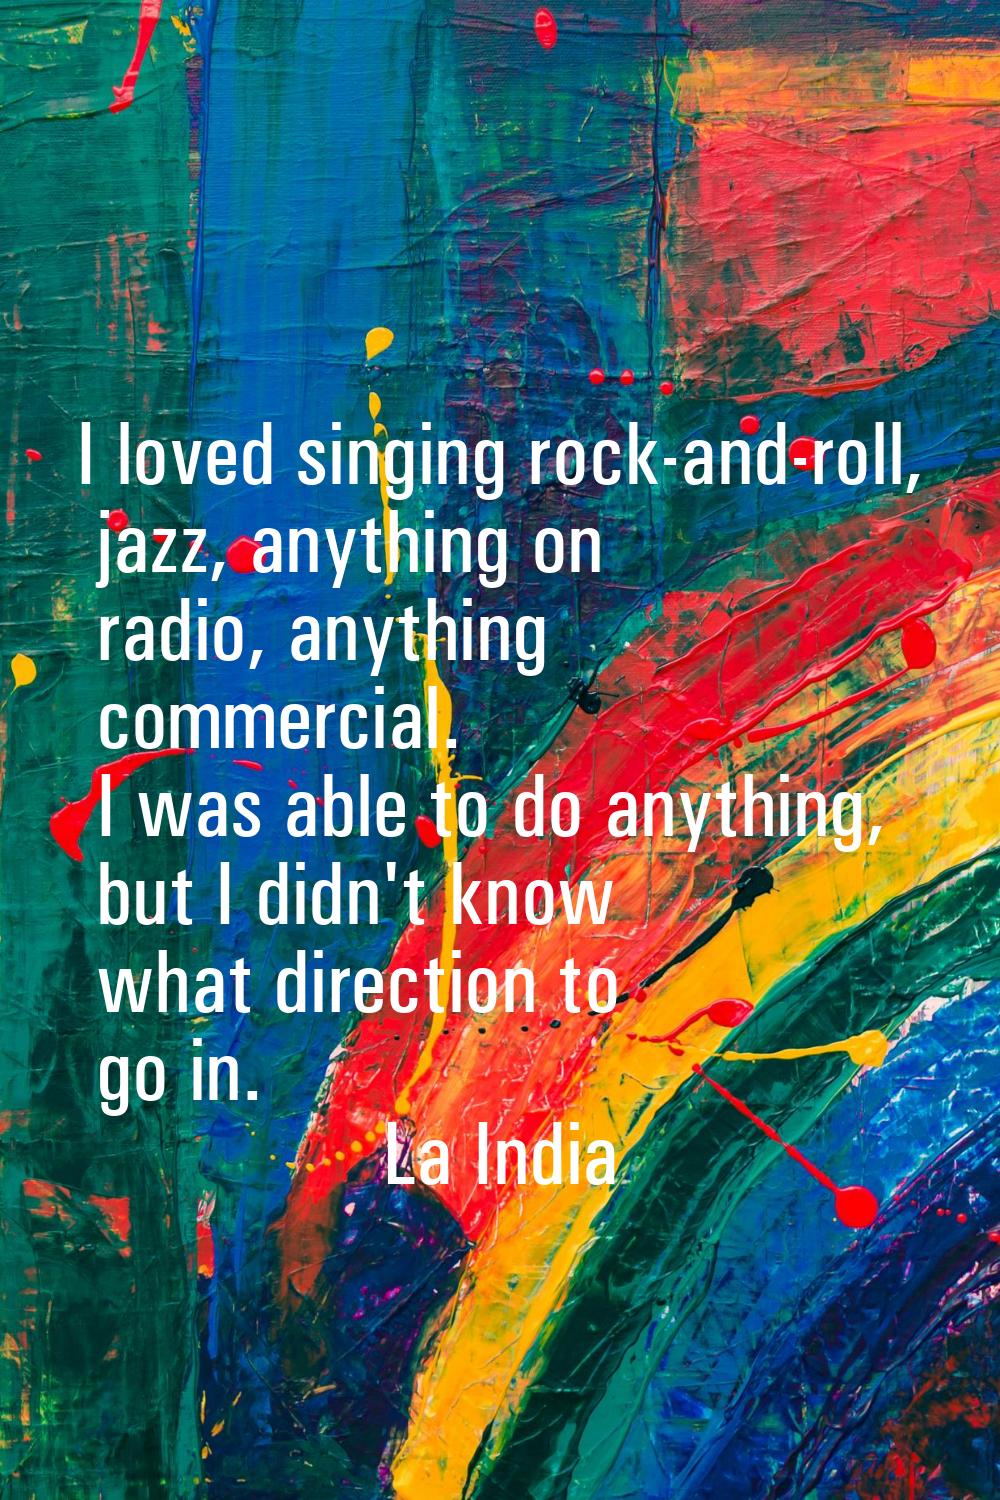 I loved singing rock-and-roll, jazz, anything on radio, anything commercial. I was able to do anyth